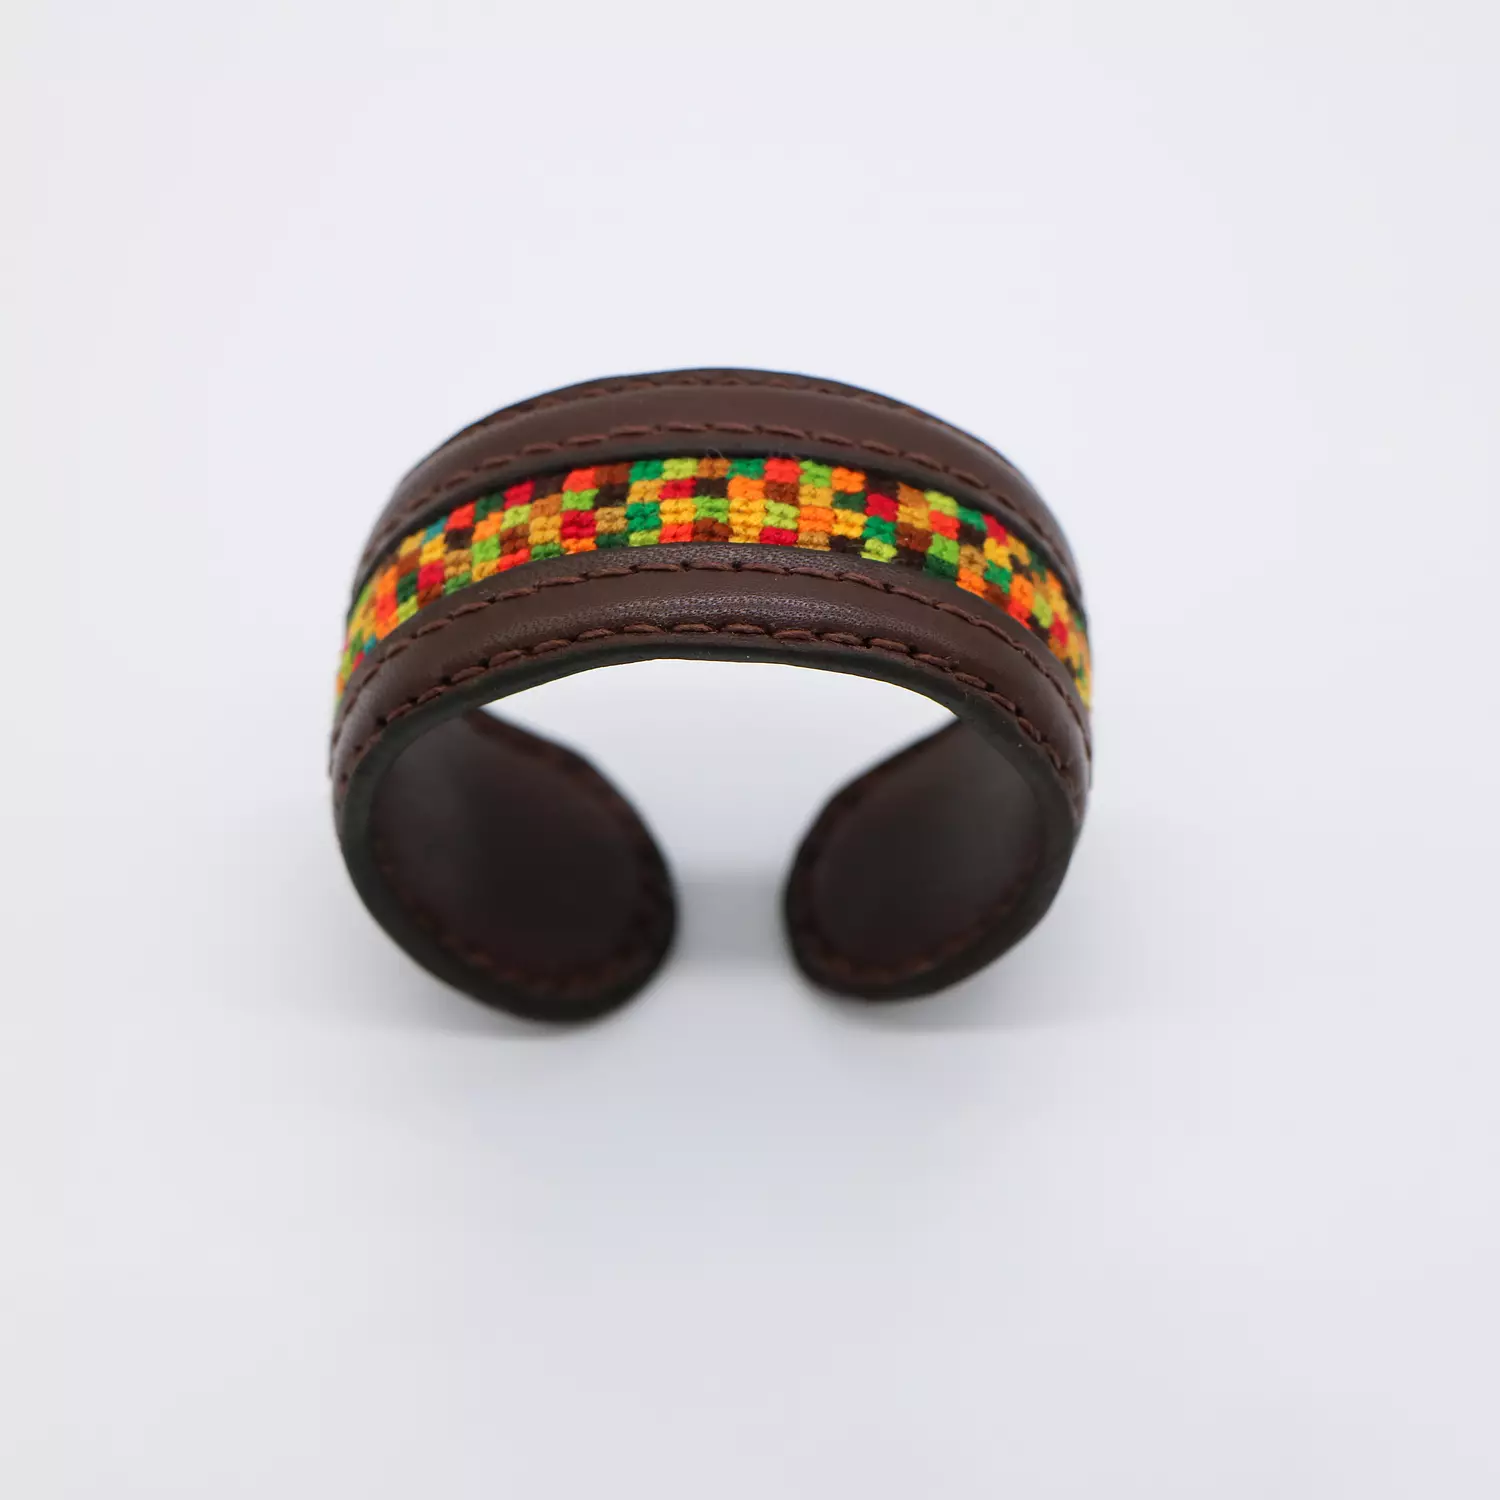 Dark brown genuine leather cuff with colorful Cross-stitching. hover image